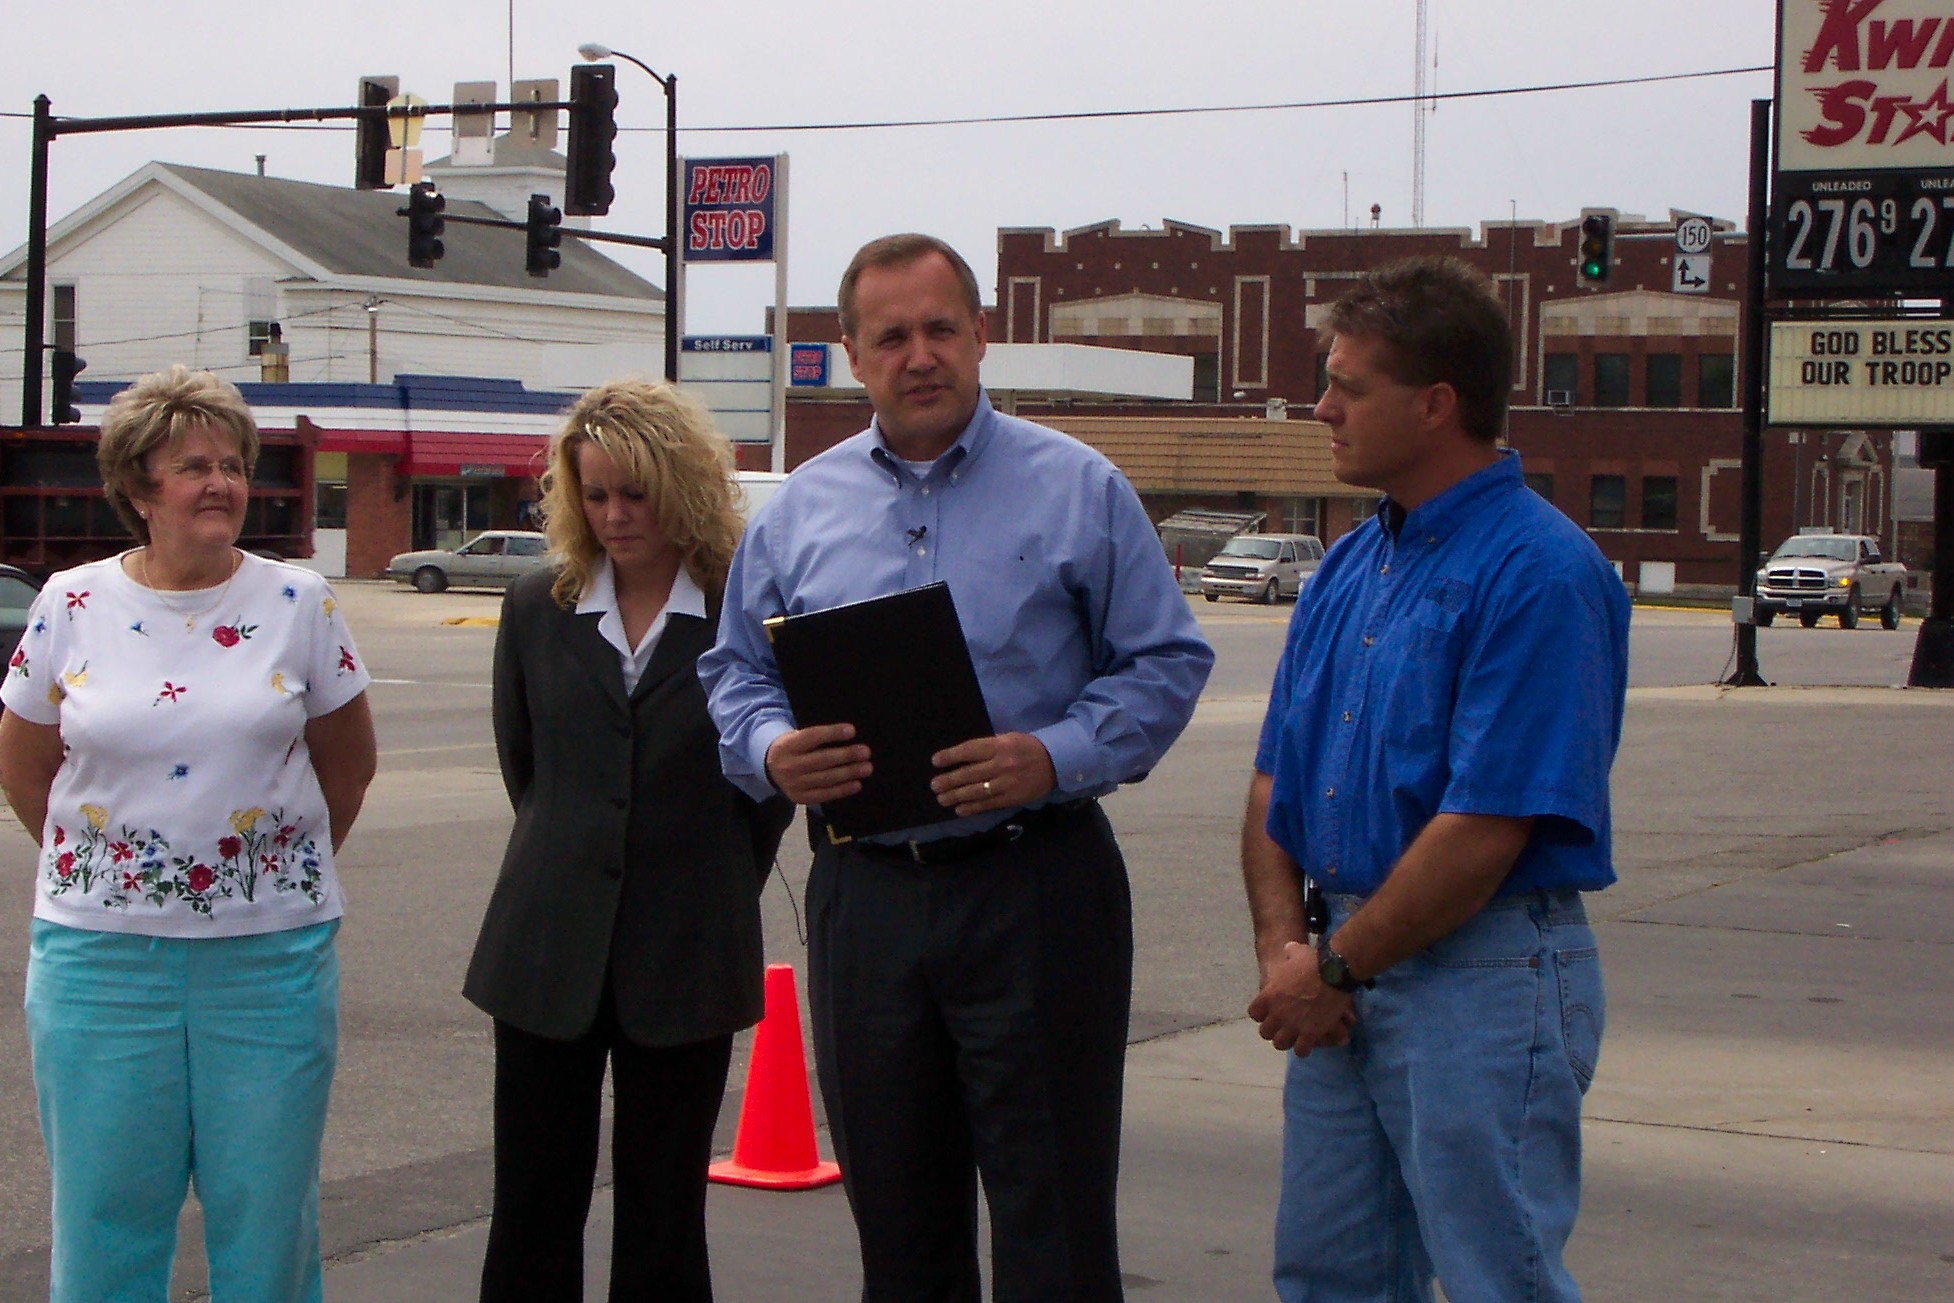 Jim unveils new energy legislation at a gas station in Independence.